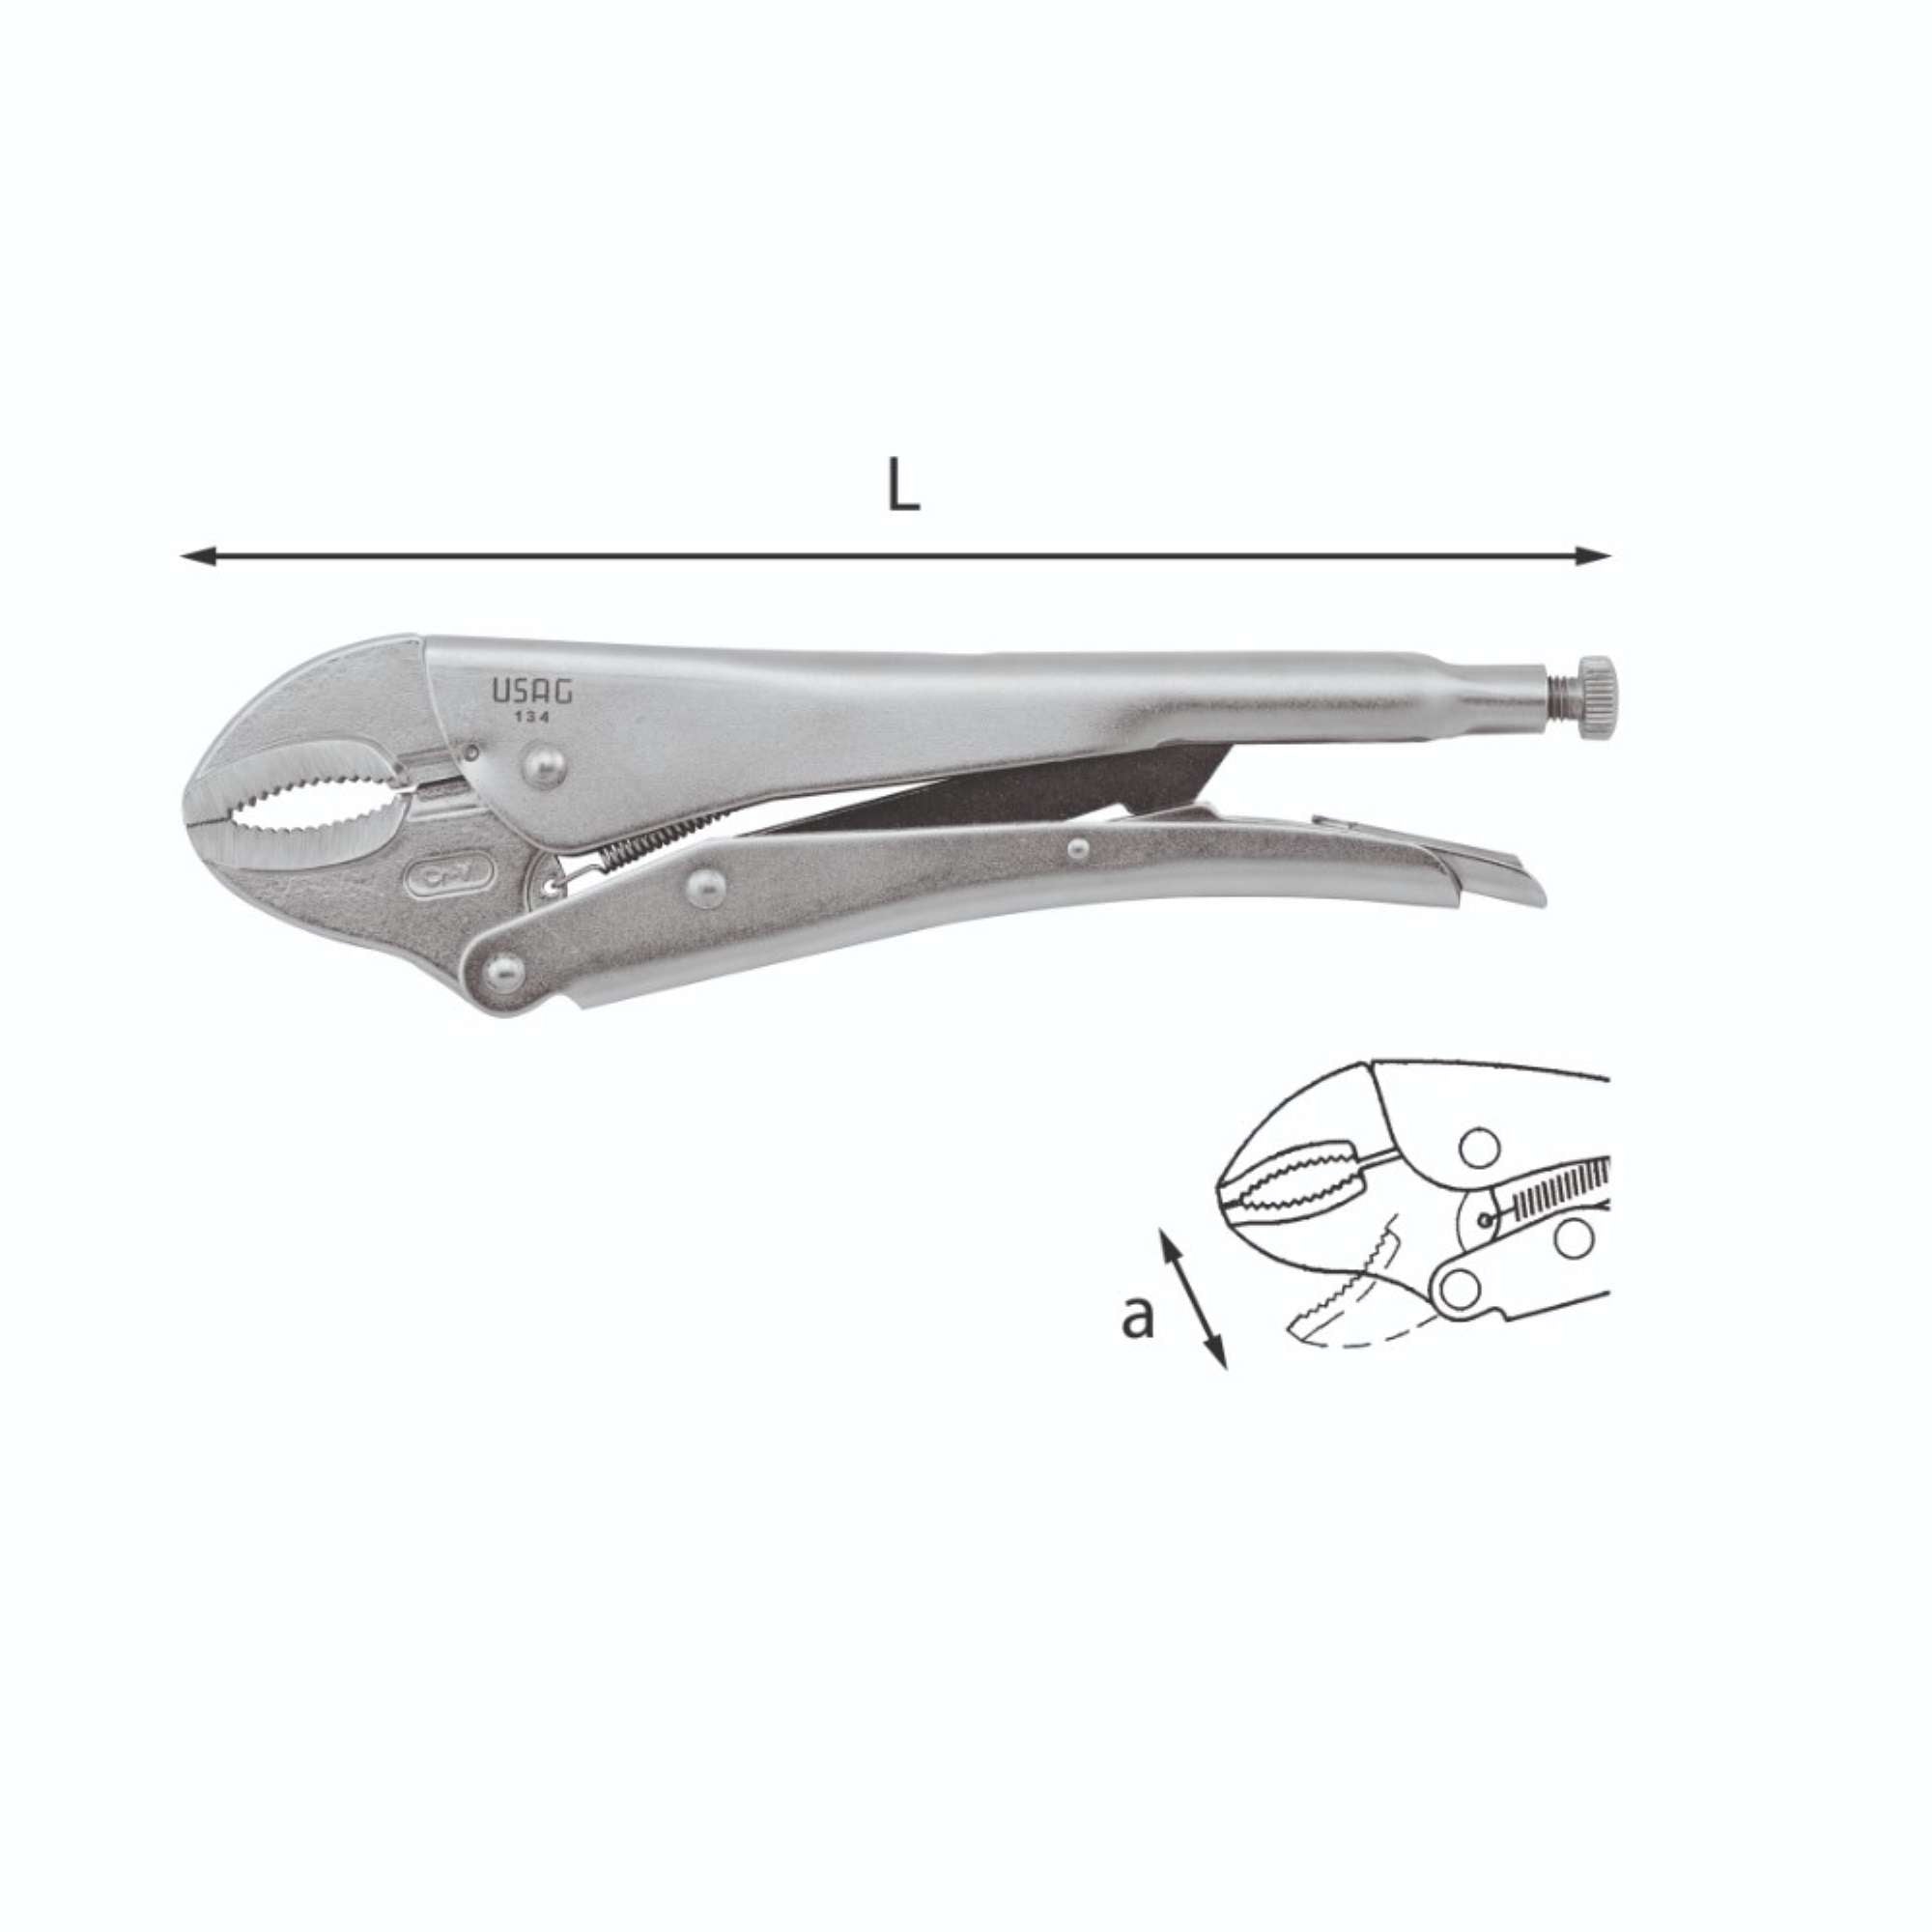 Adjustable pliers with concave jaws - Usag U01340001